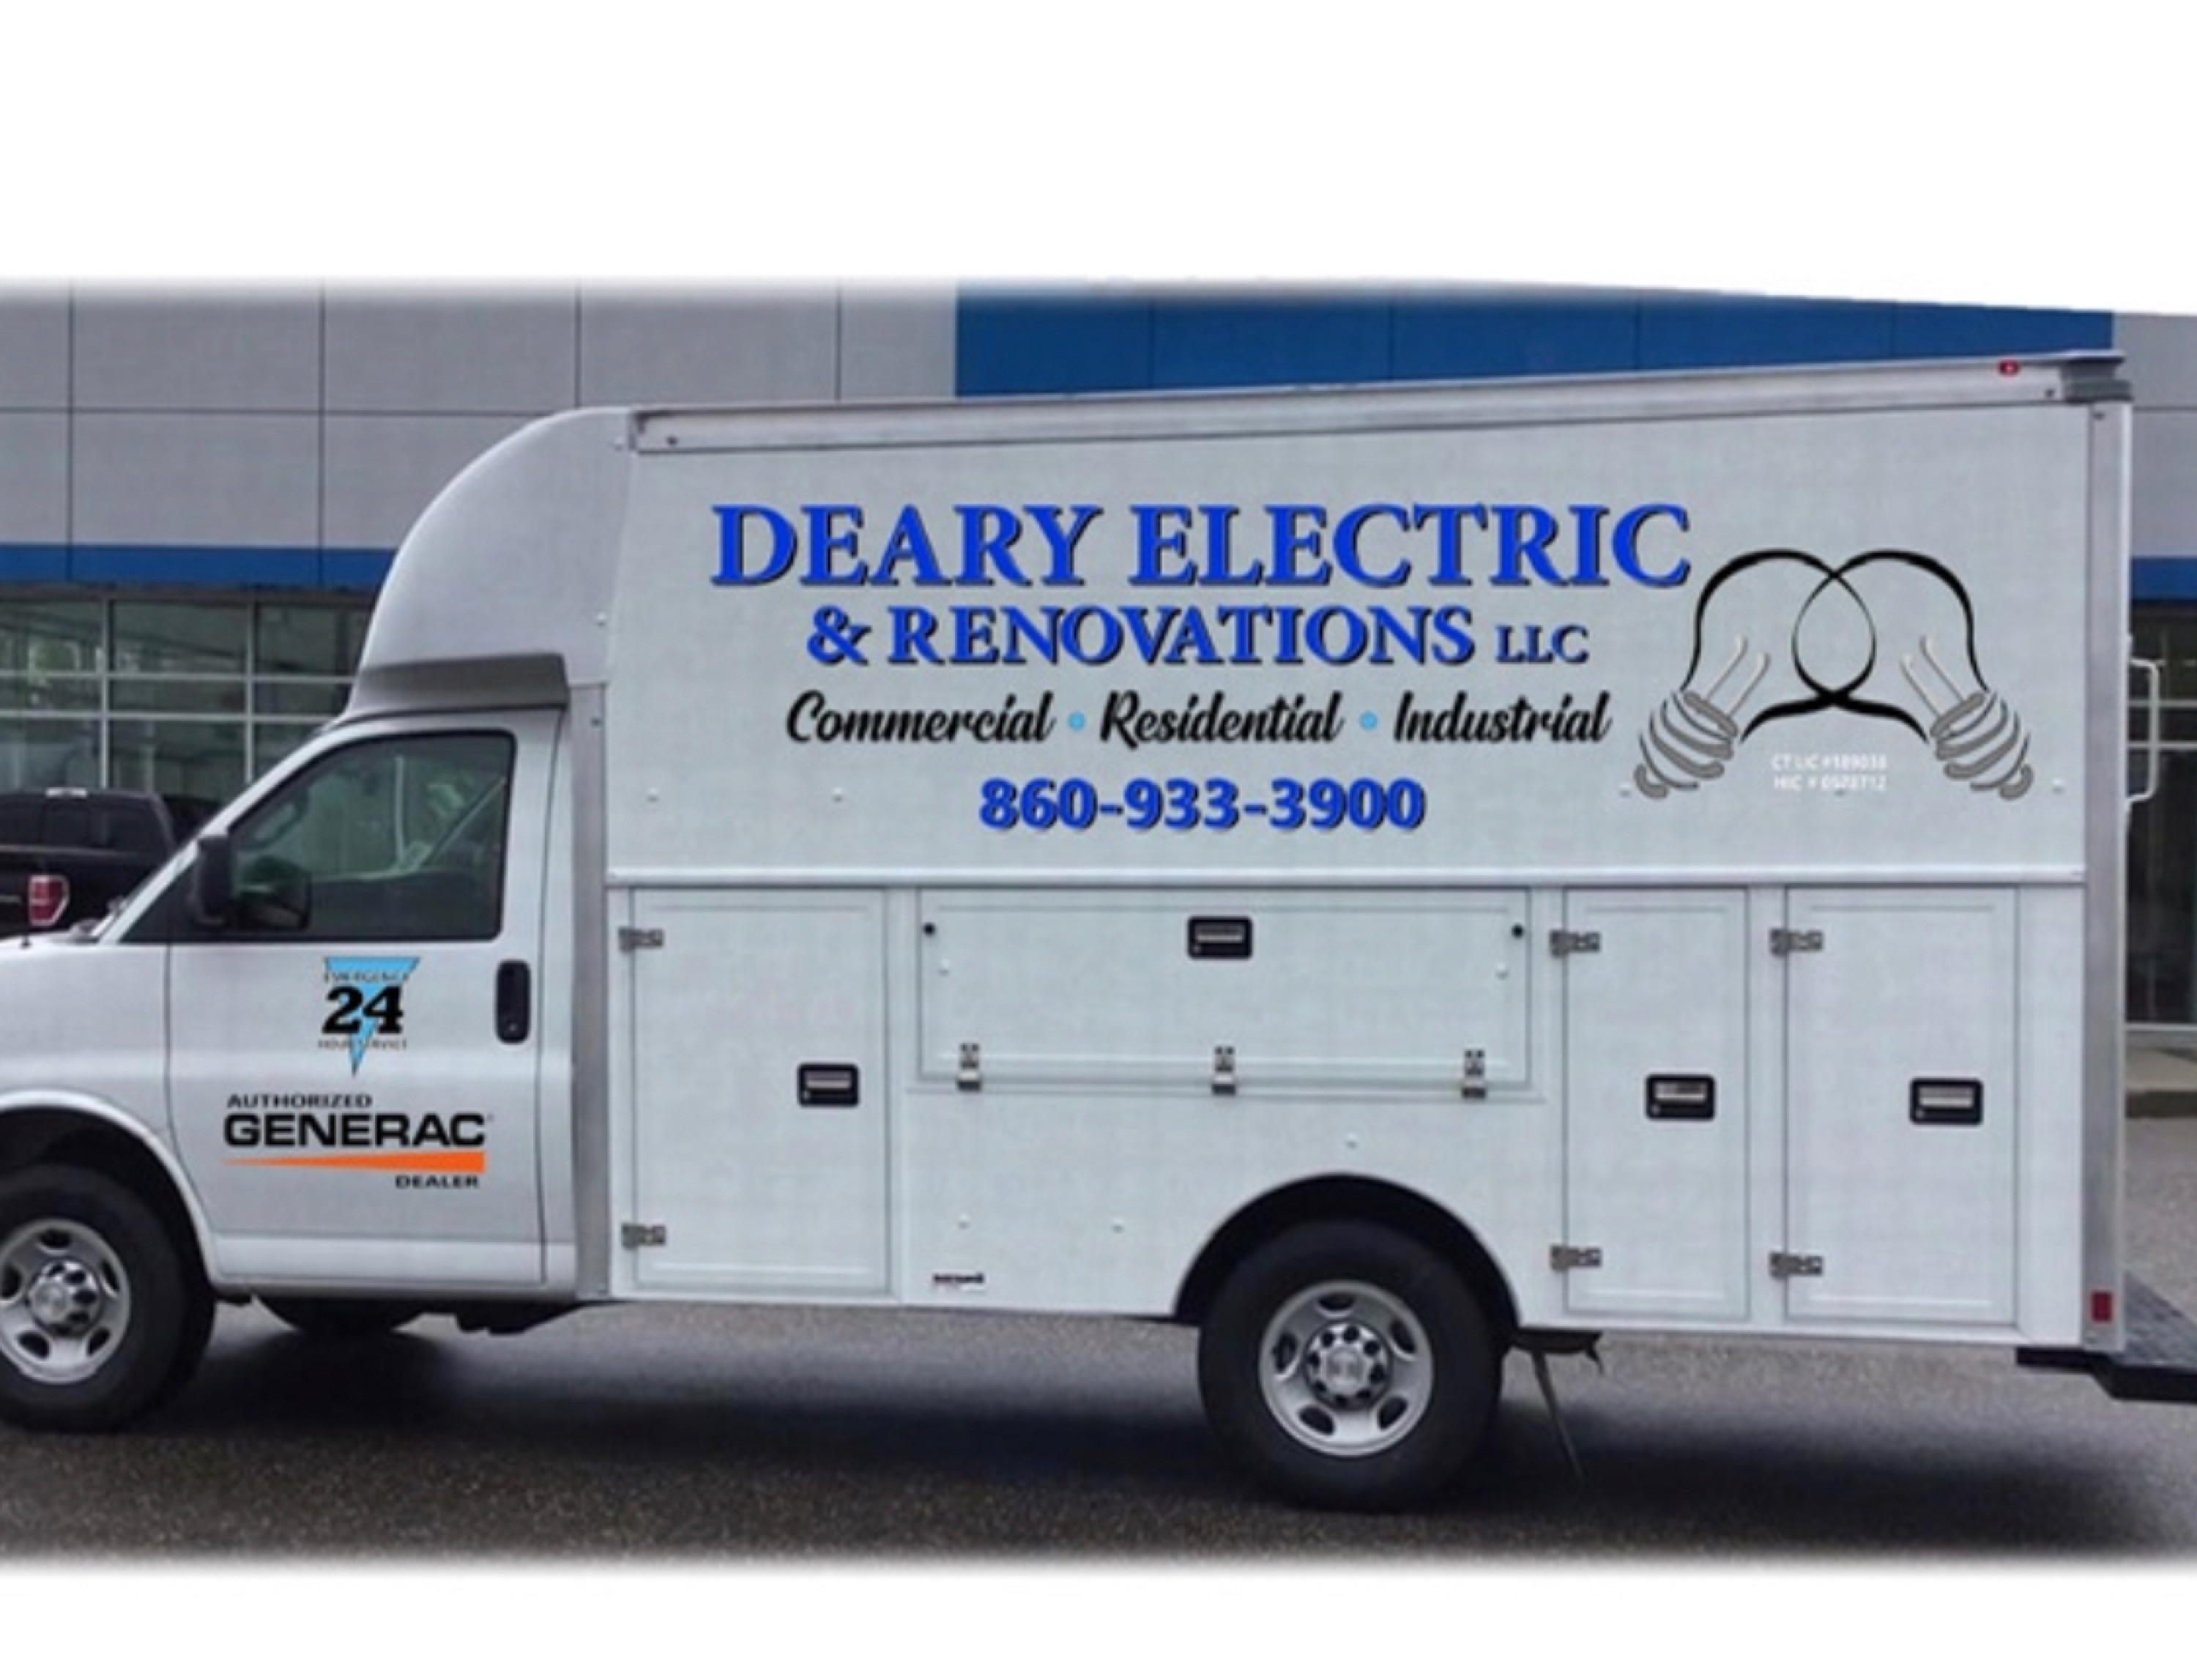 Deary Electric and Renovations, LLC Logo